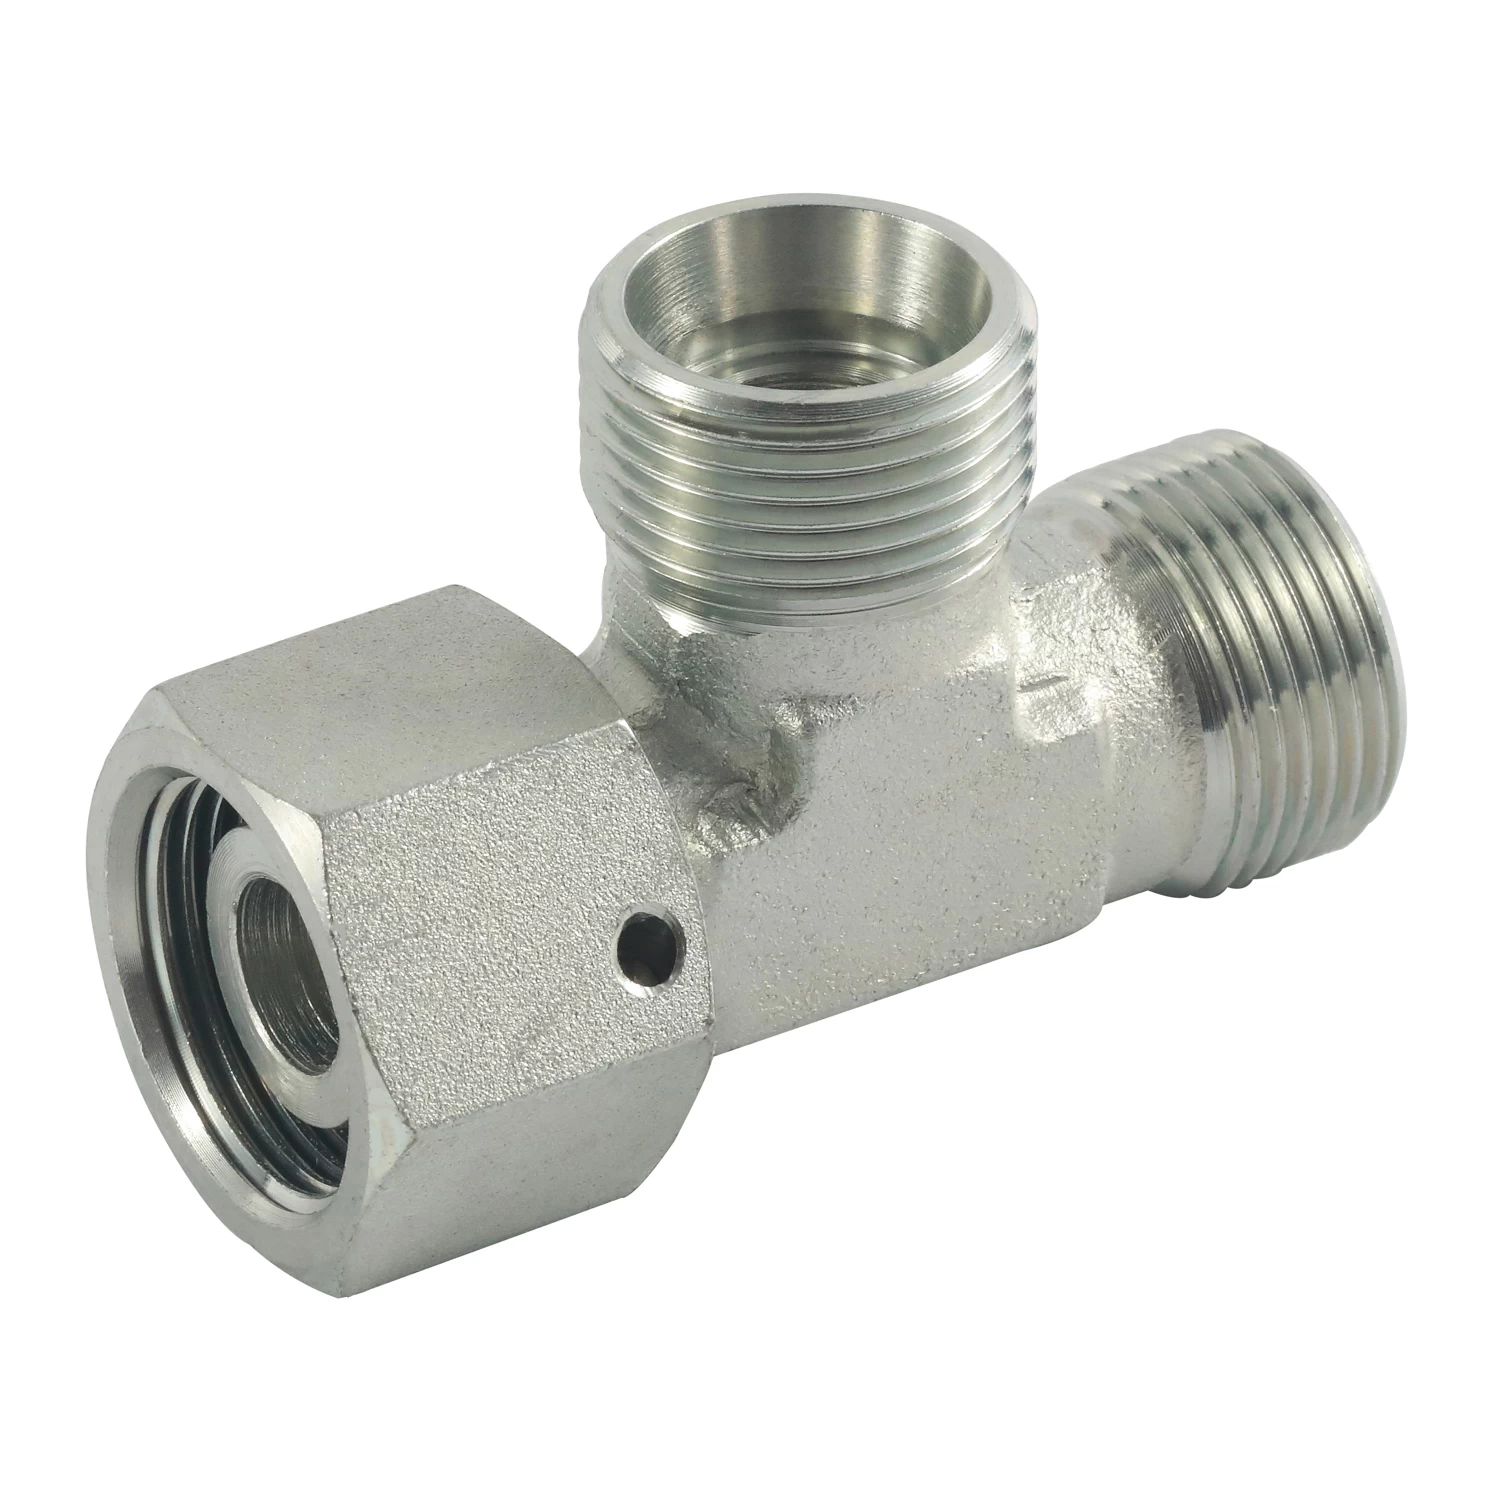 Cina CC run tee fittings with swivel nut tube fittings produttore